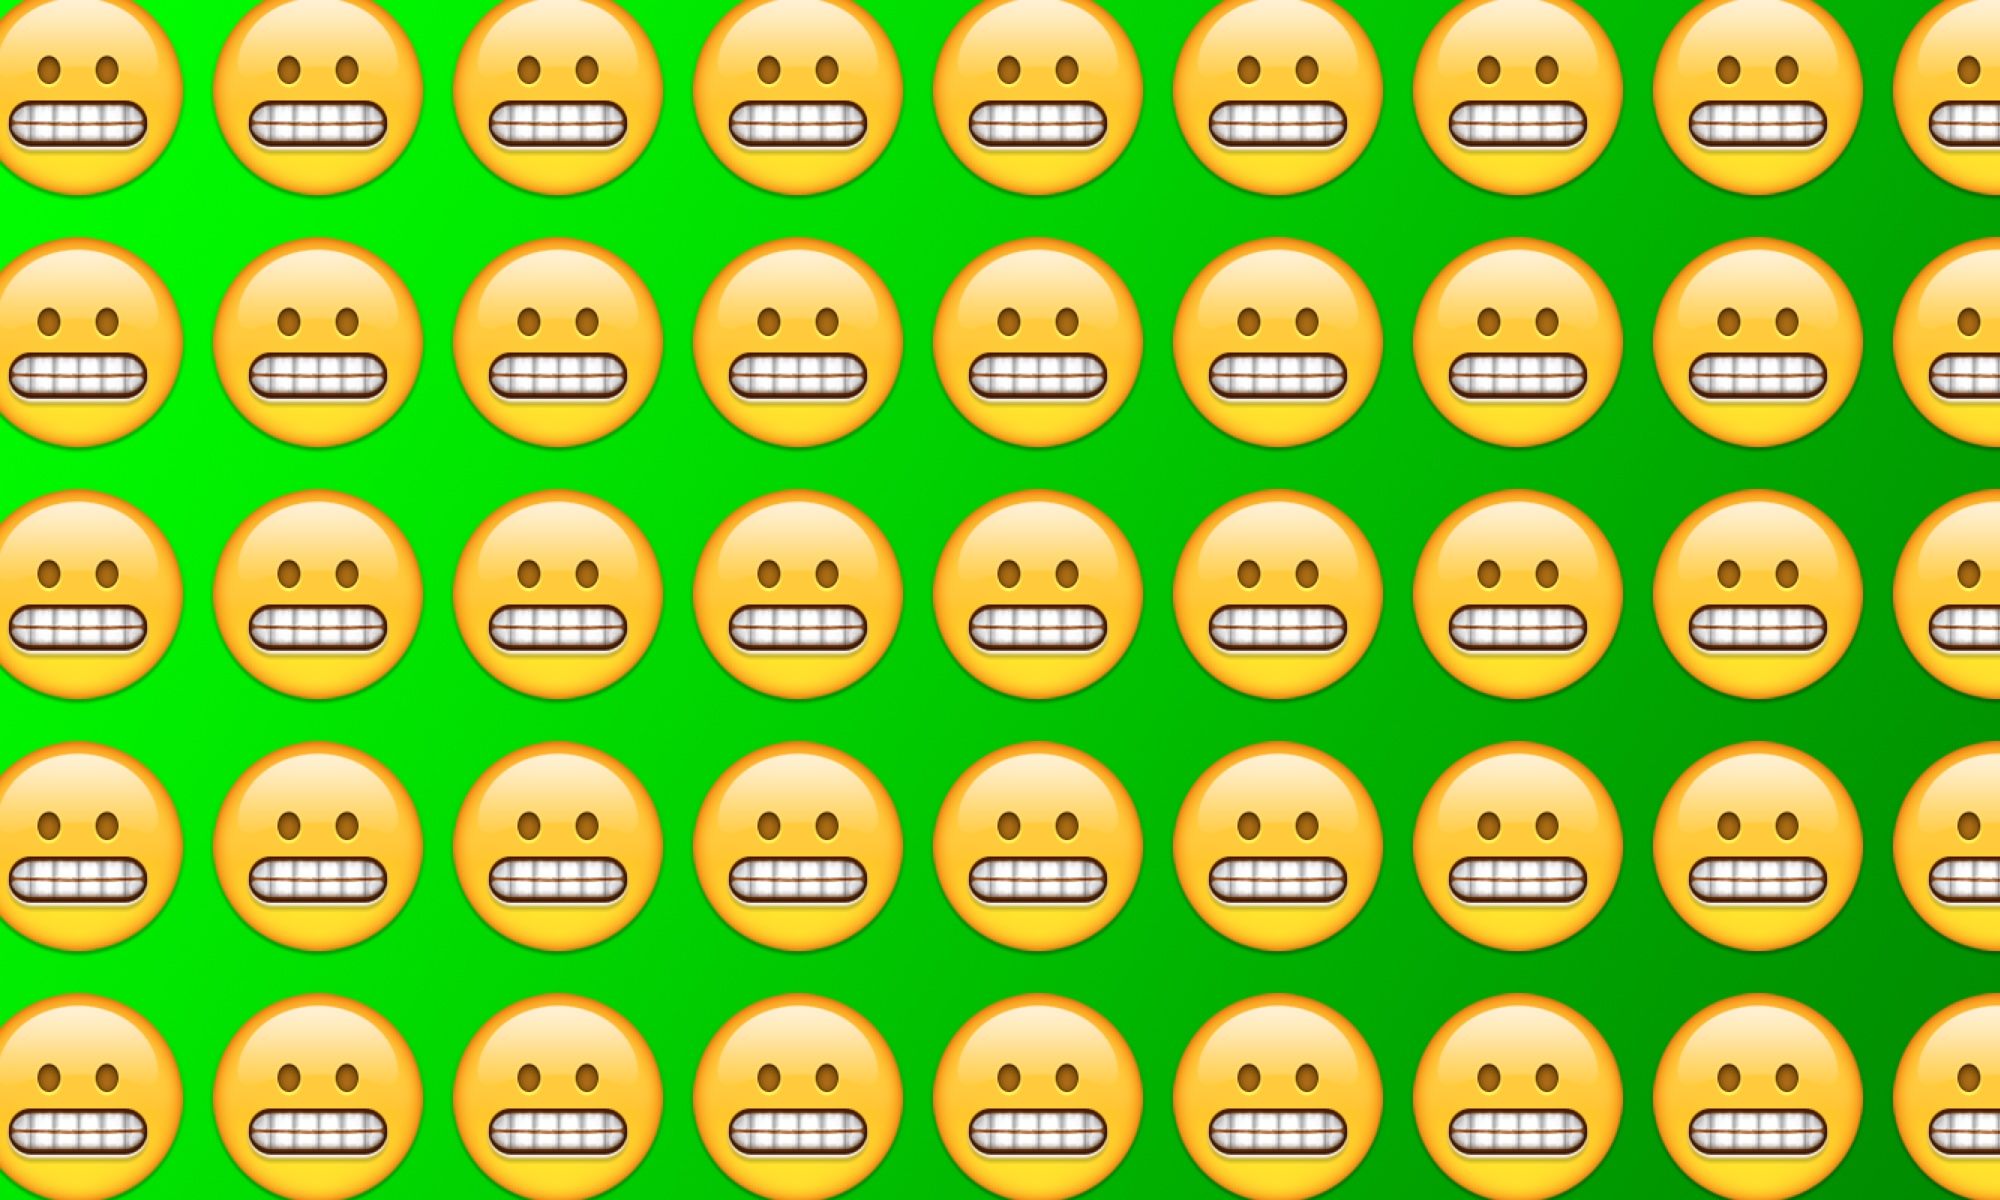 True Meaning Of Whatsapp Emoticons Smiley Symbols.